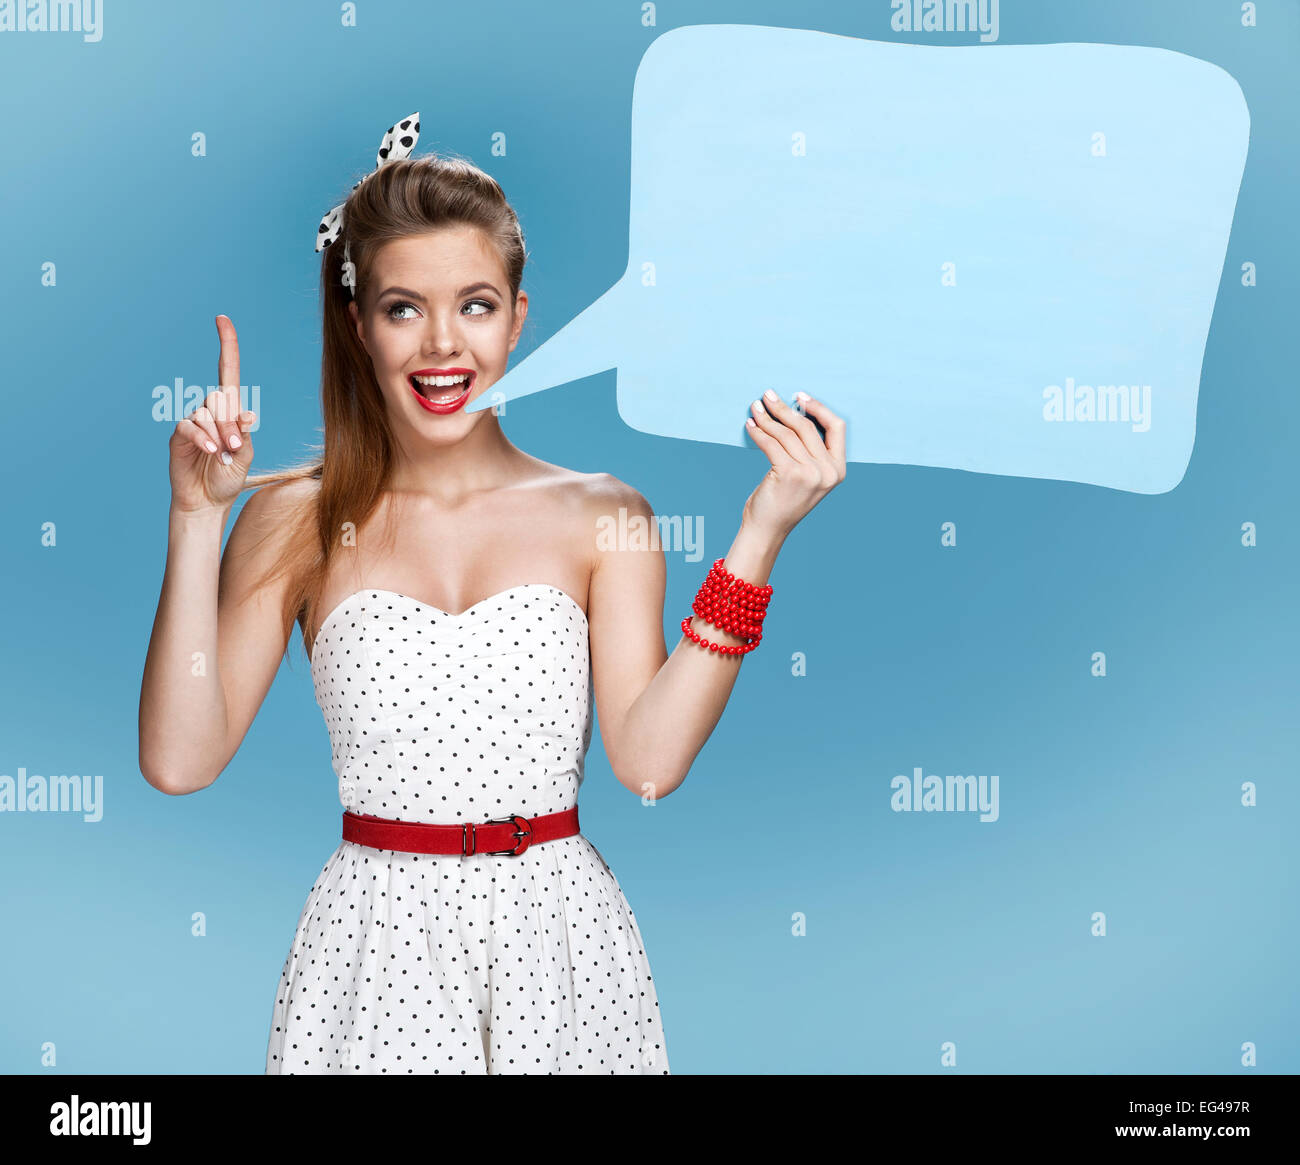 Young talkative woman showing sign speech bubble banner looking happy excited Stock Photo